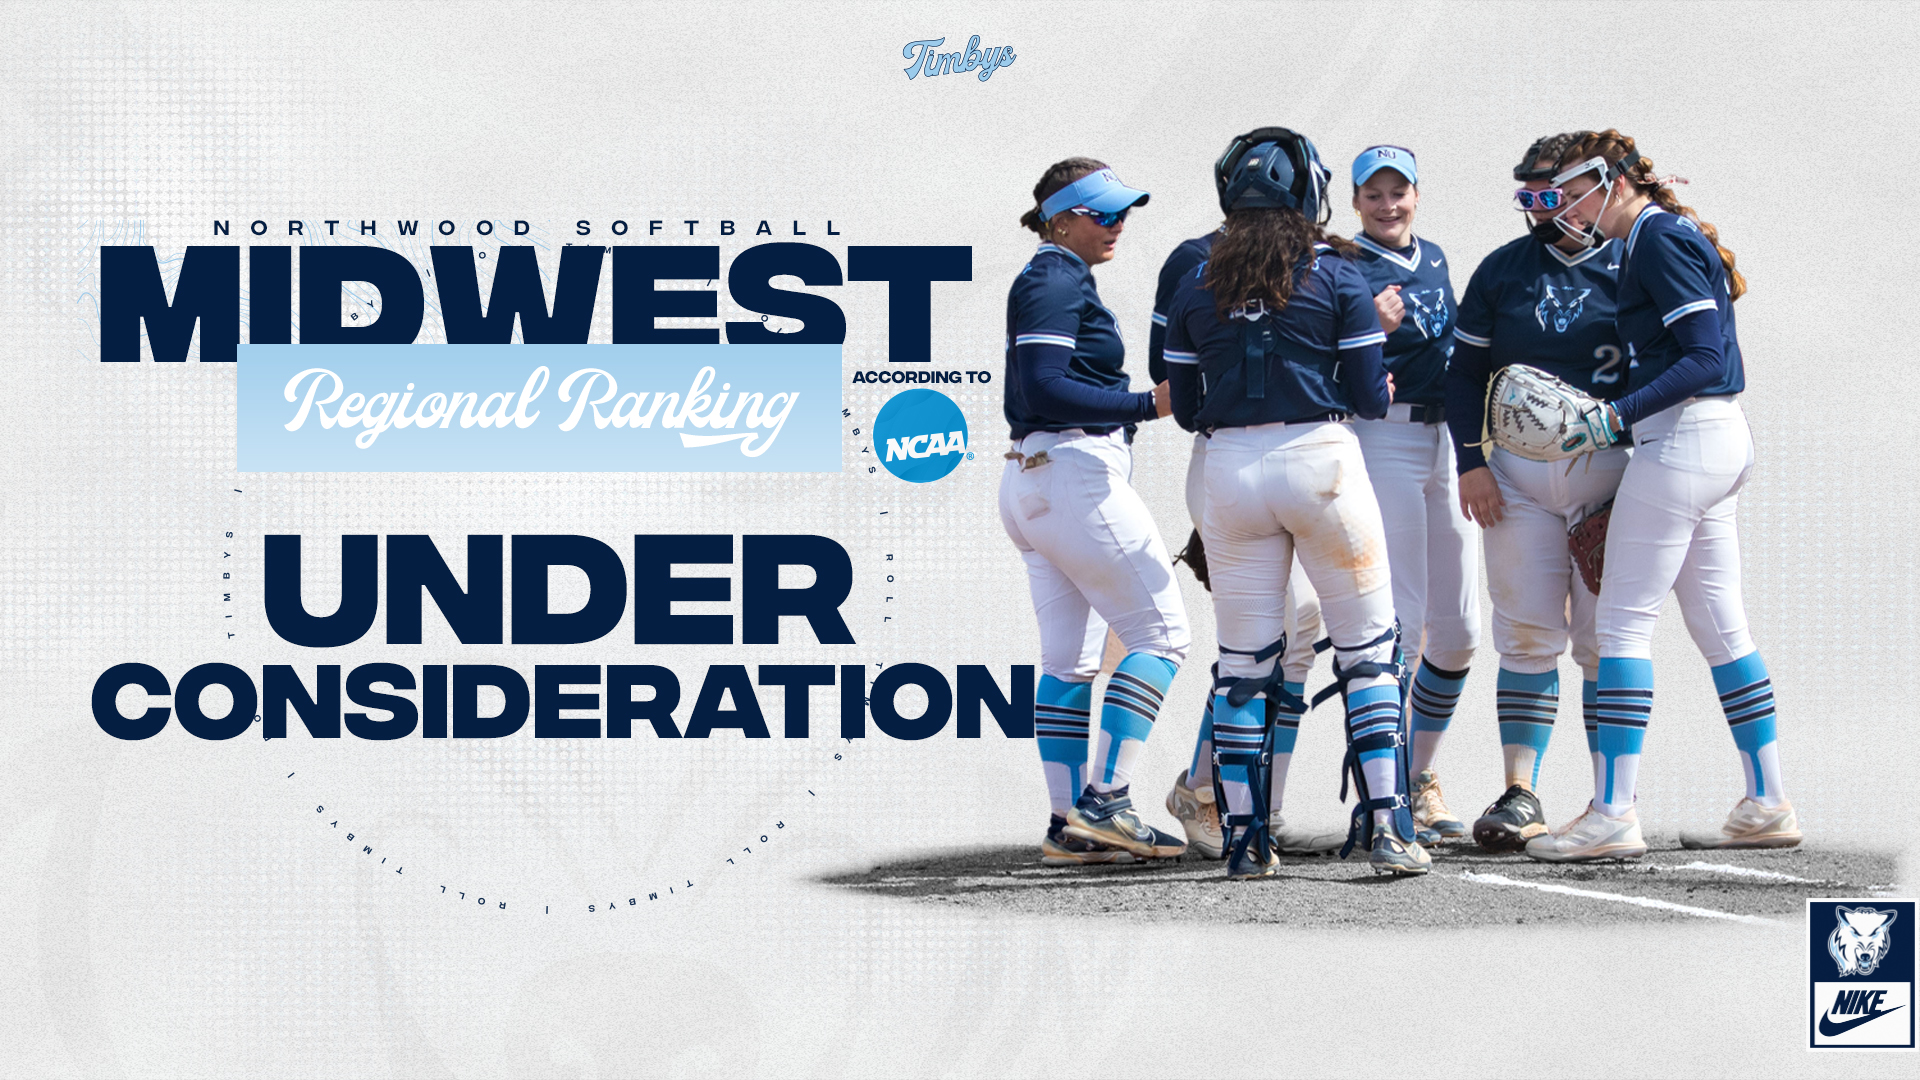 Softball Appears Under Consideration In Initial Midwest Regional Rankings